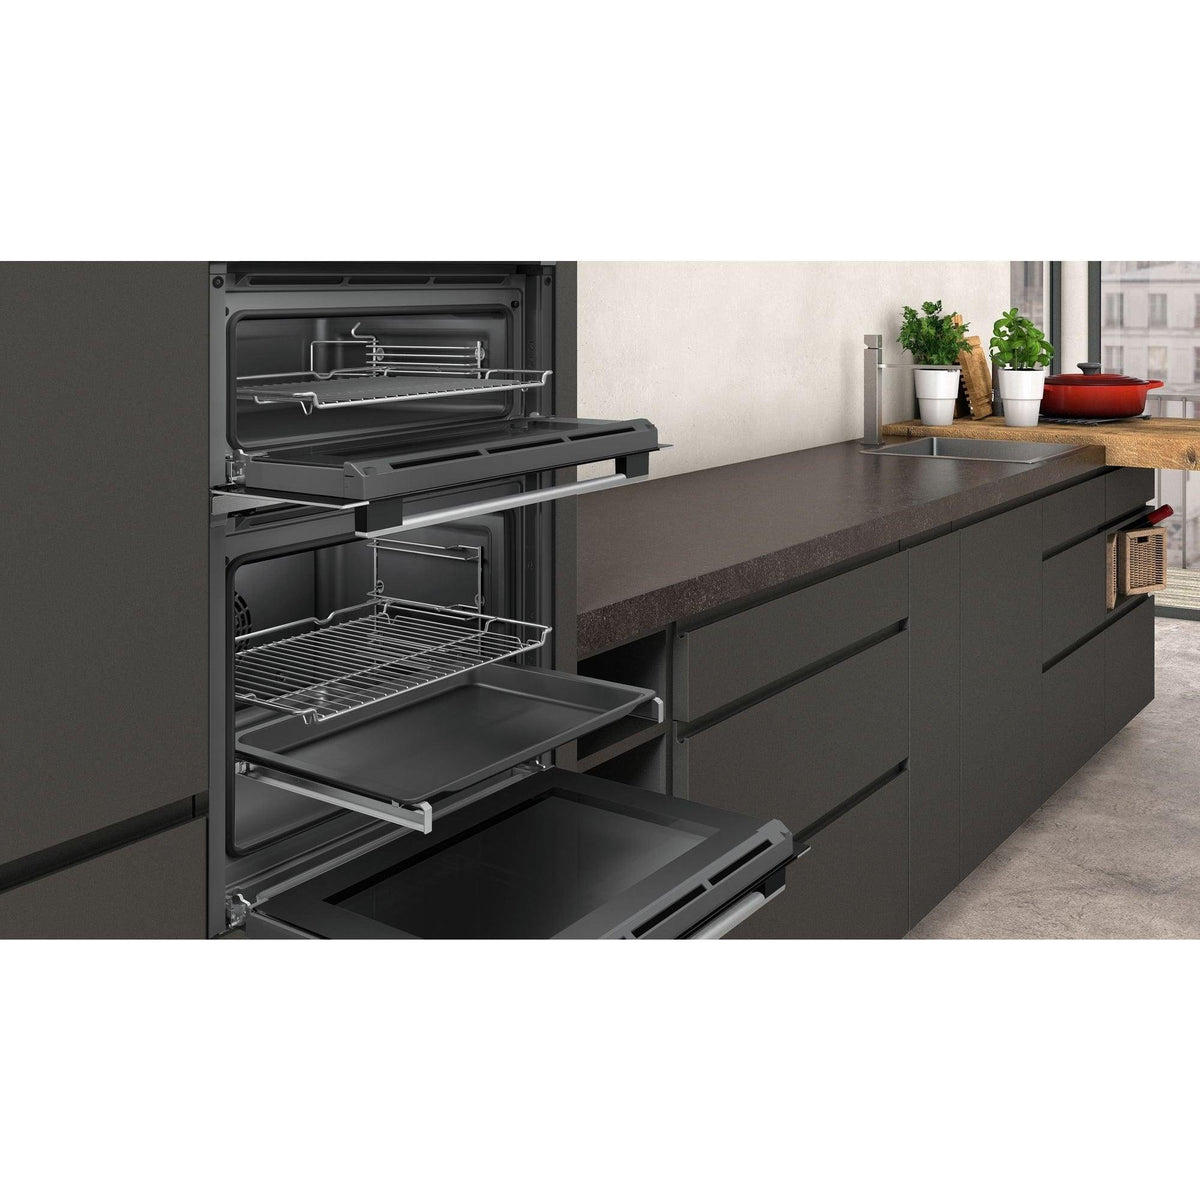 Neff N50 Built-In Electric Double Oven - Black | U1ACE2HN0B from DID Electrical - guaranteed Irish, guaranteed quality service. (6890781737148)